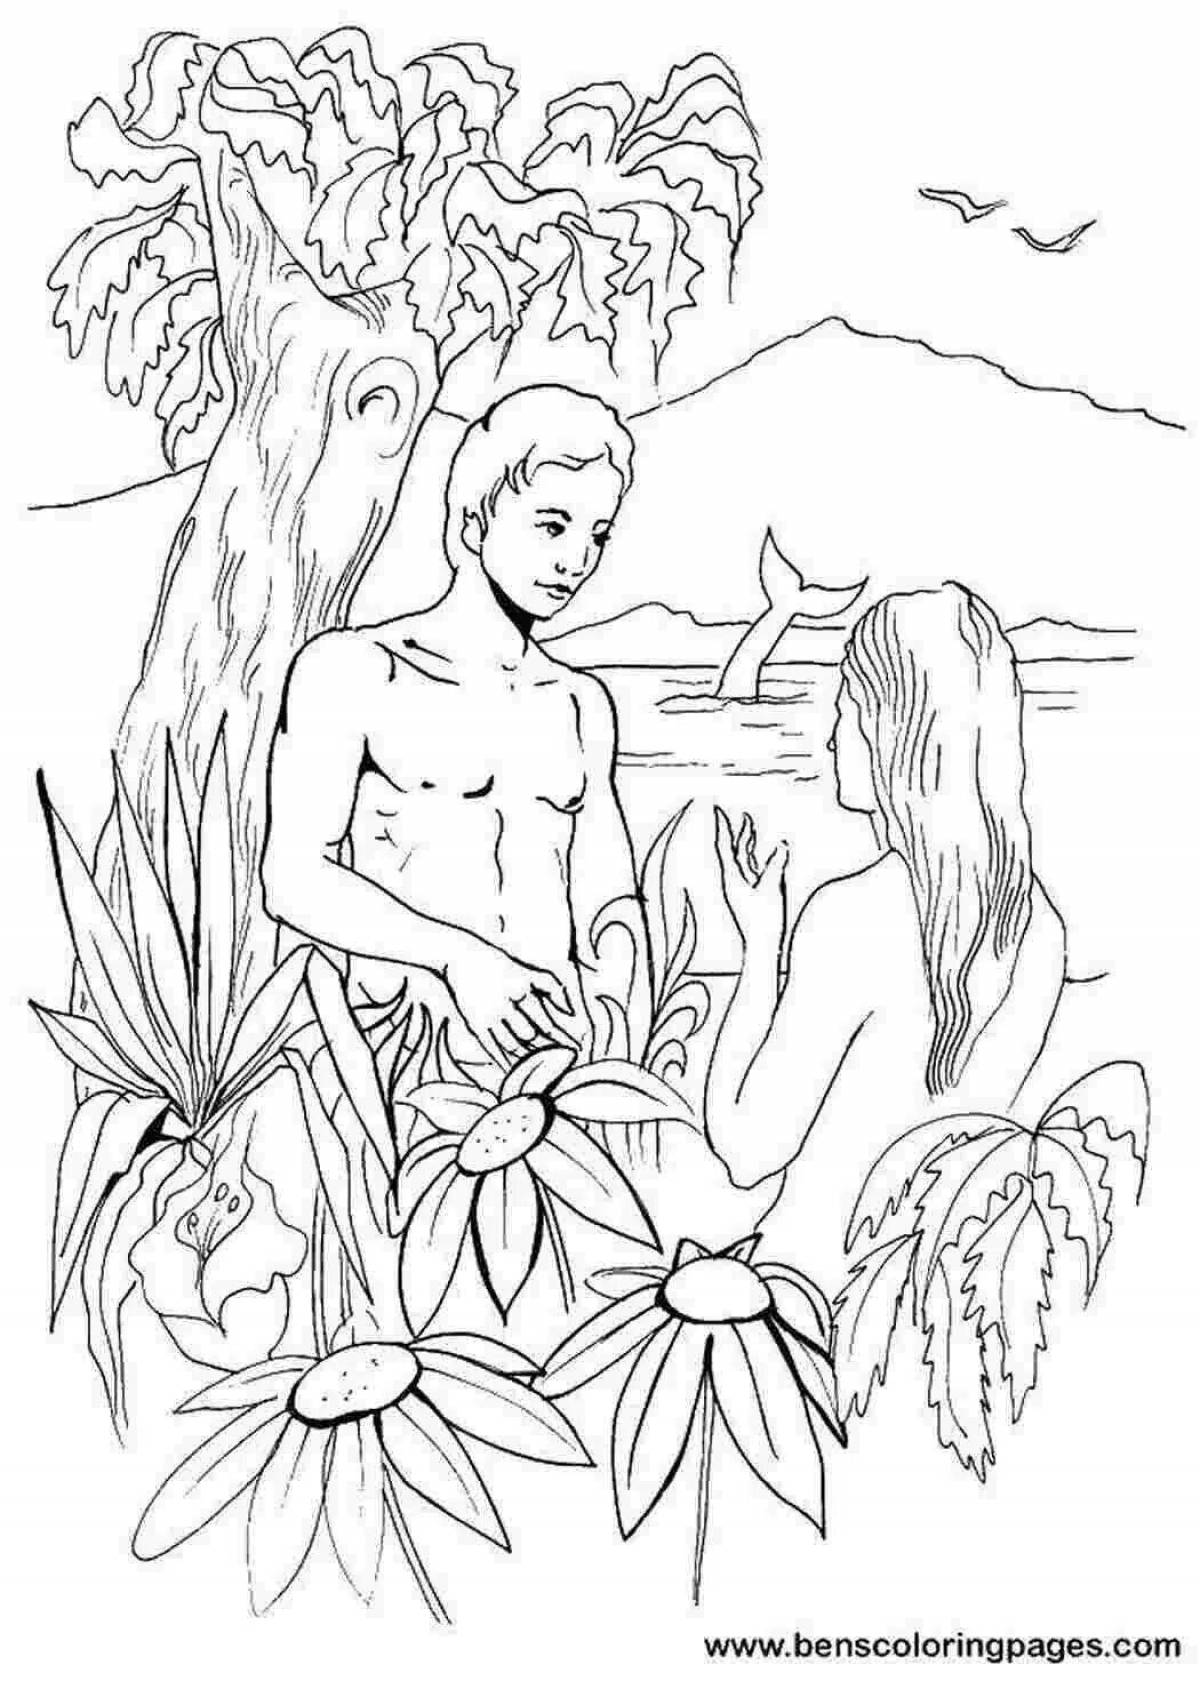 Coloring wild adam and eve